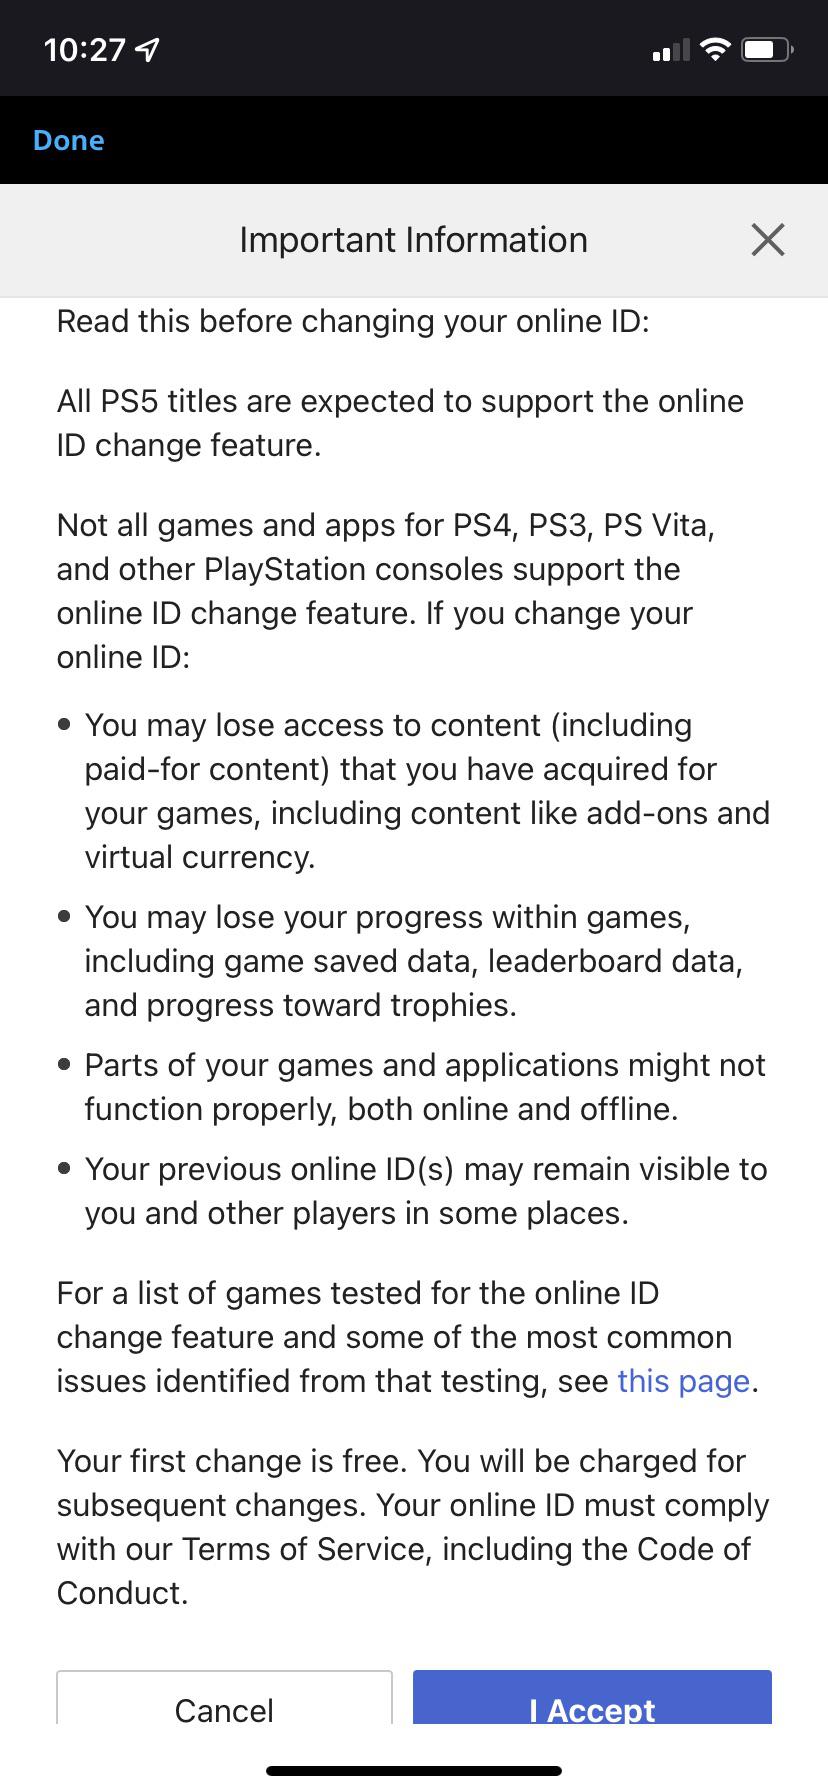 Make sure to sync your game saves and trophies before changing your PSN ID.
Check if the game supports the PSN ID change feature, as some older games may not be compatible.